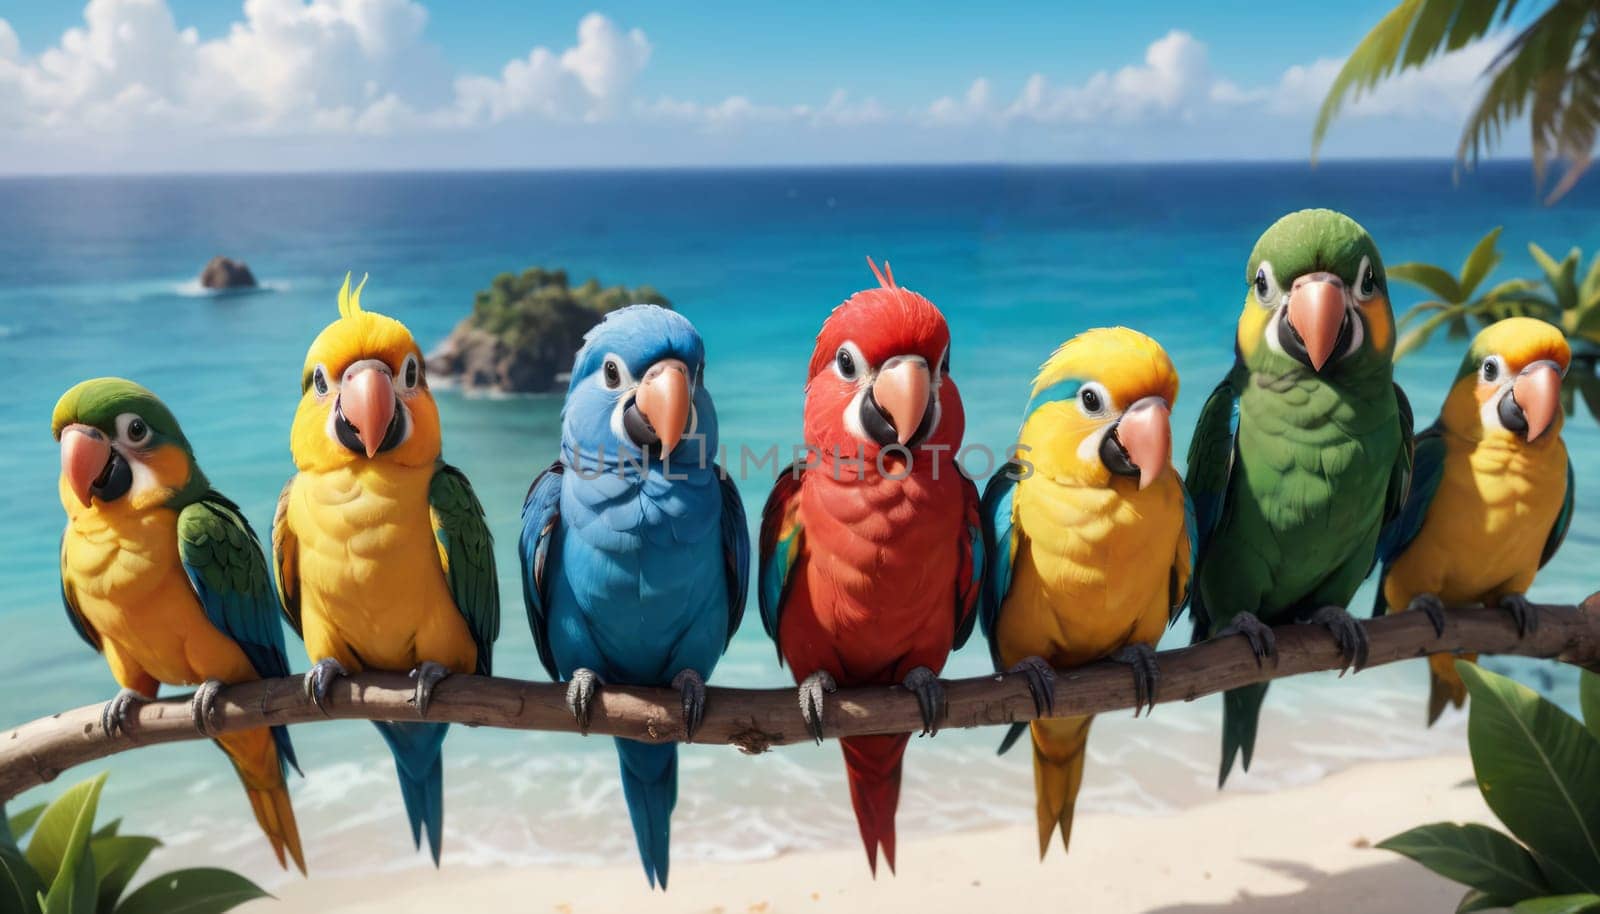 Parrots Paradise on a Beachfront by nkotlyar